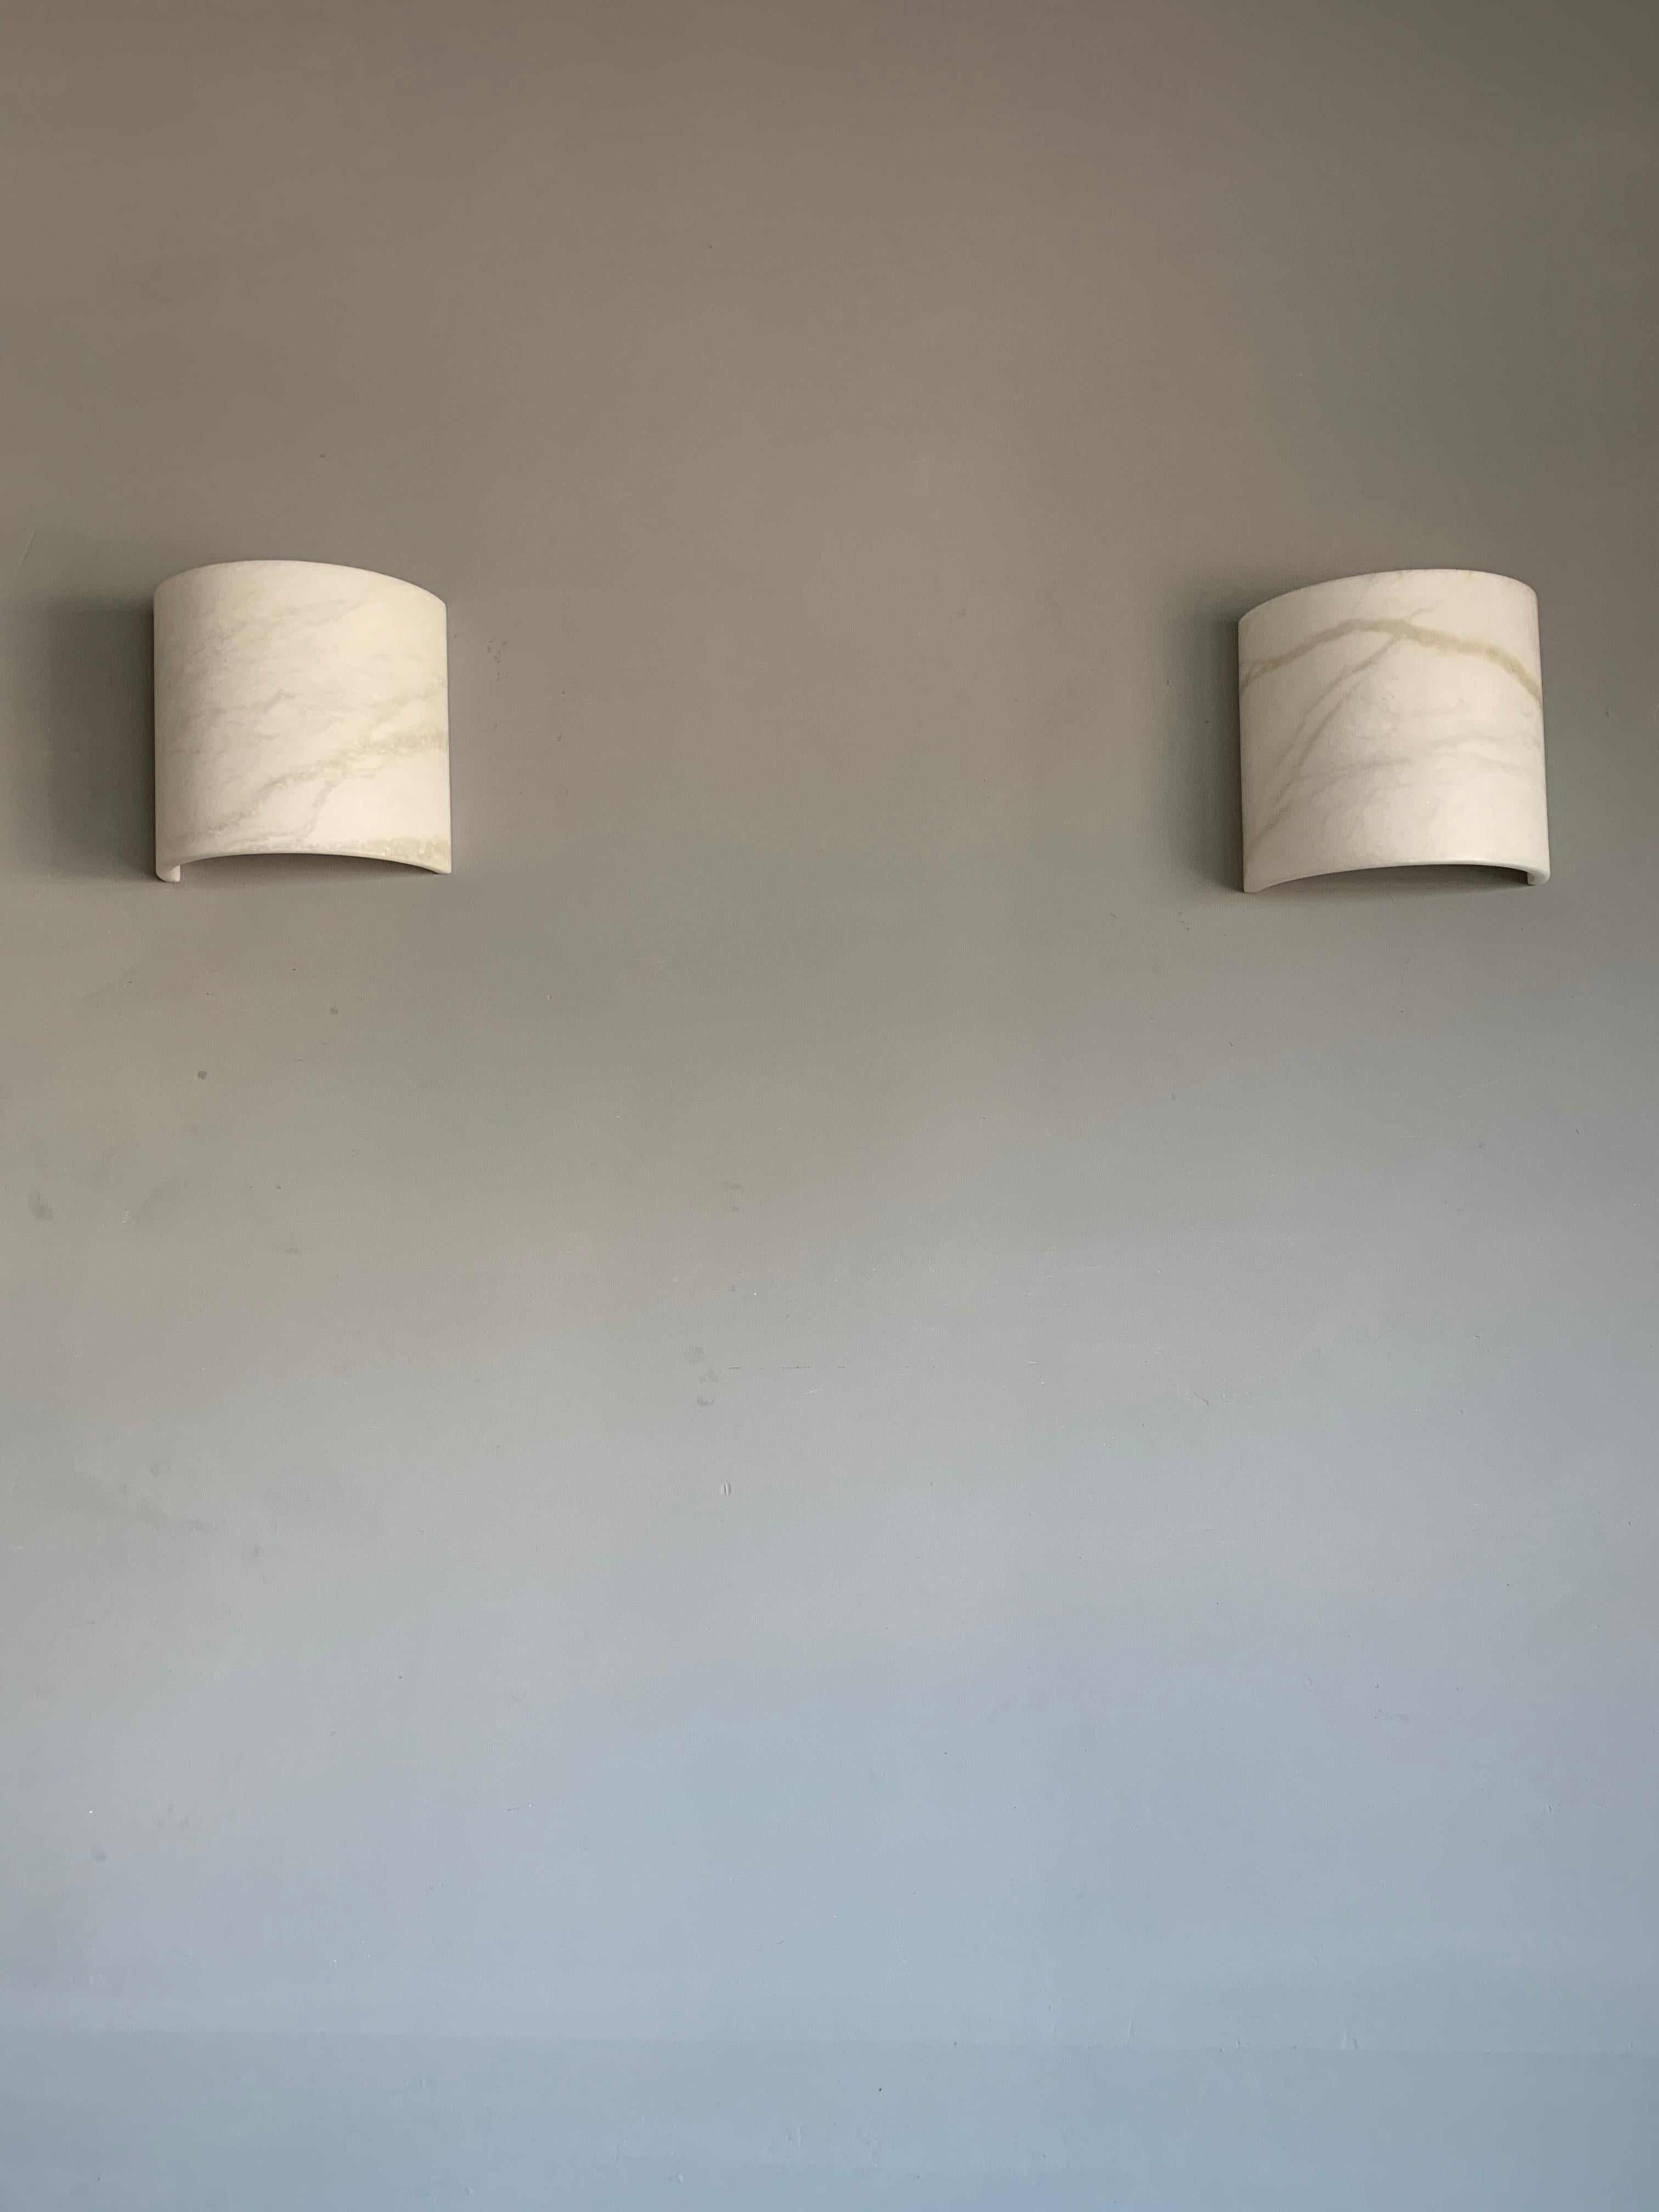 Hand-Crafted Vintage Set of Four White Art Deco Style Alabaster Wall Sconces / Fixtures Lamps